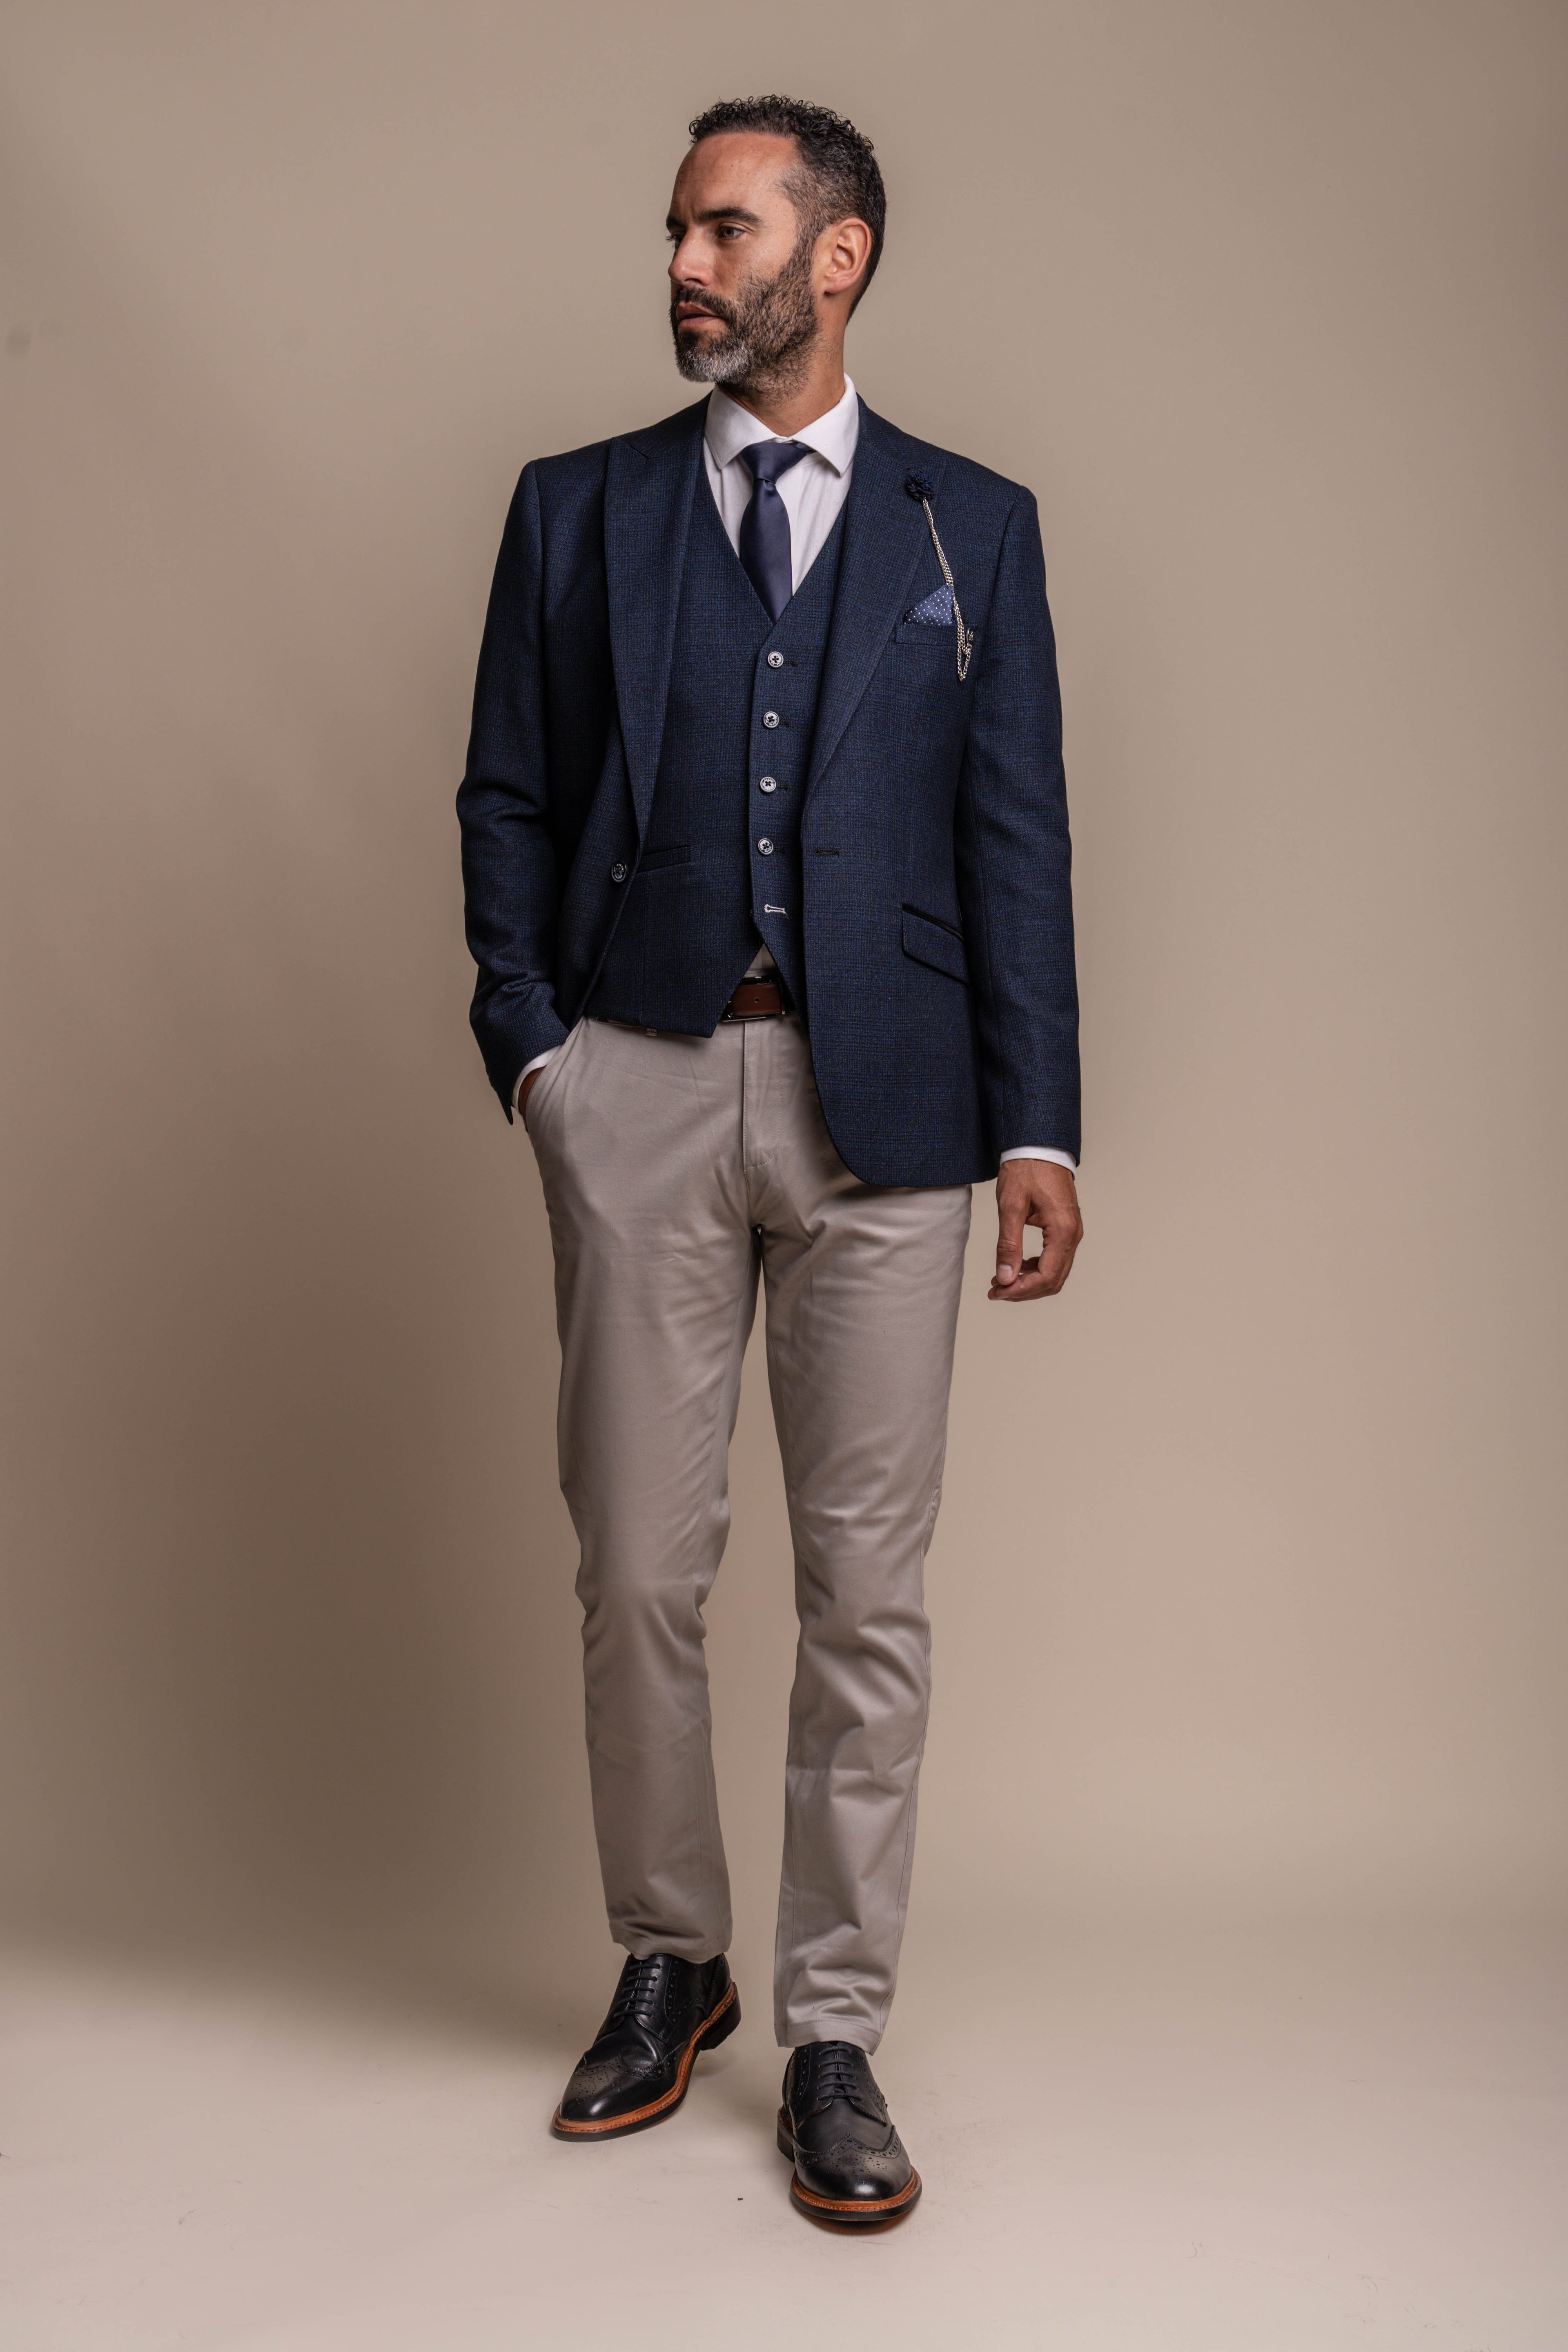 Combining Grey, Brown and Navy in an Outfit - Elegantly Dressed